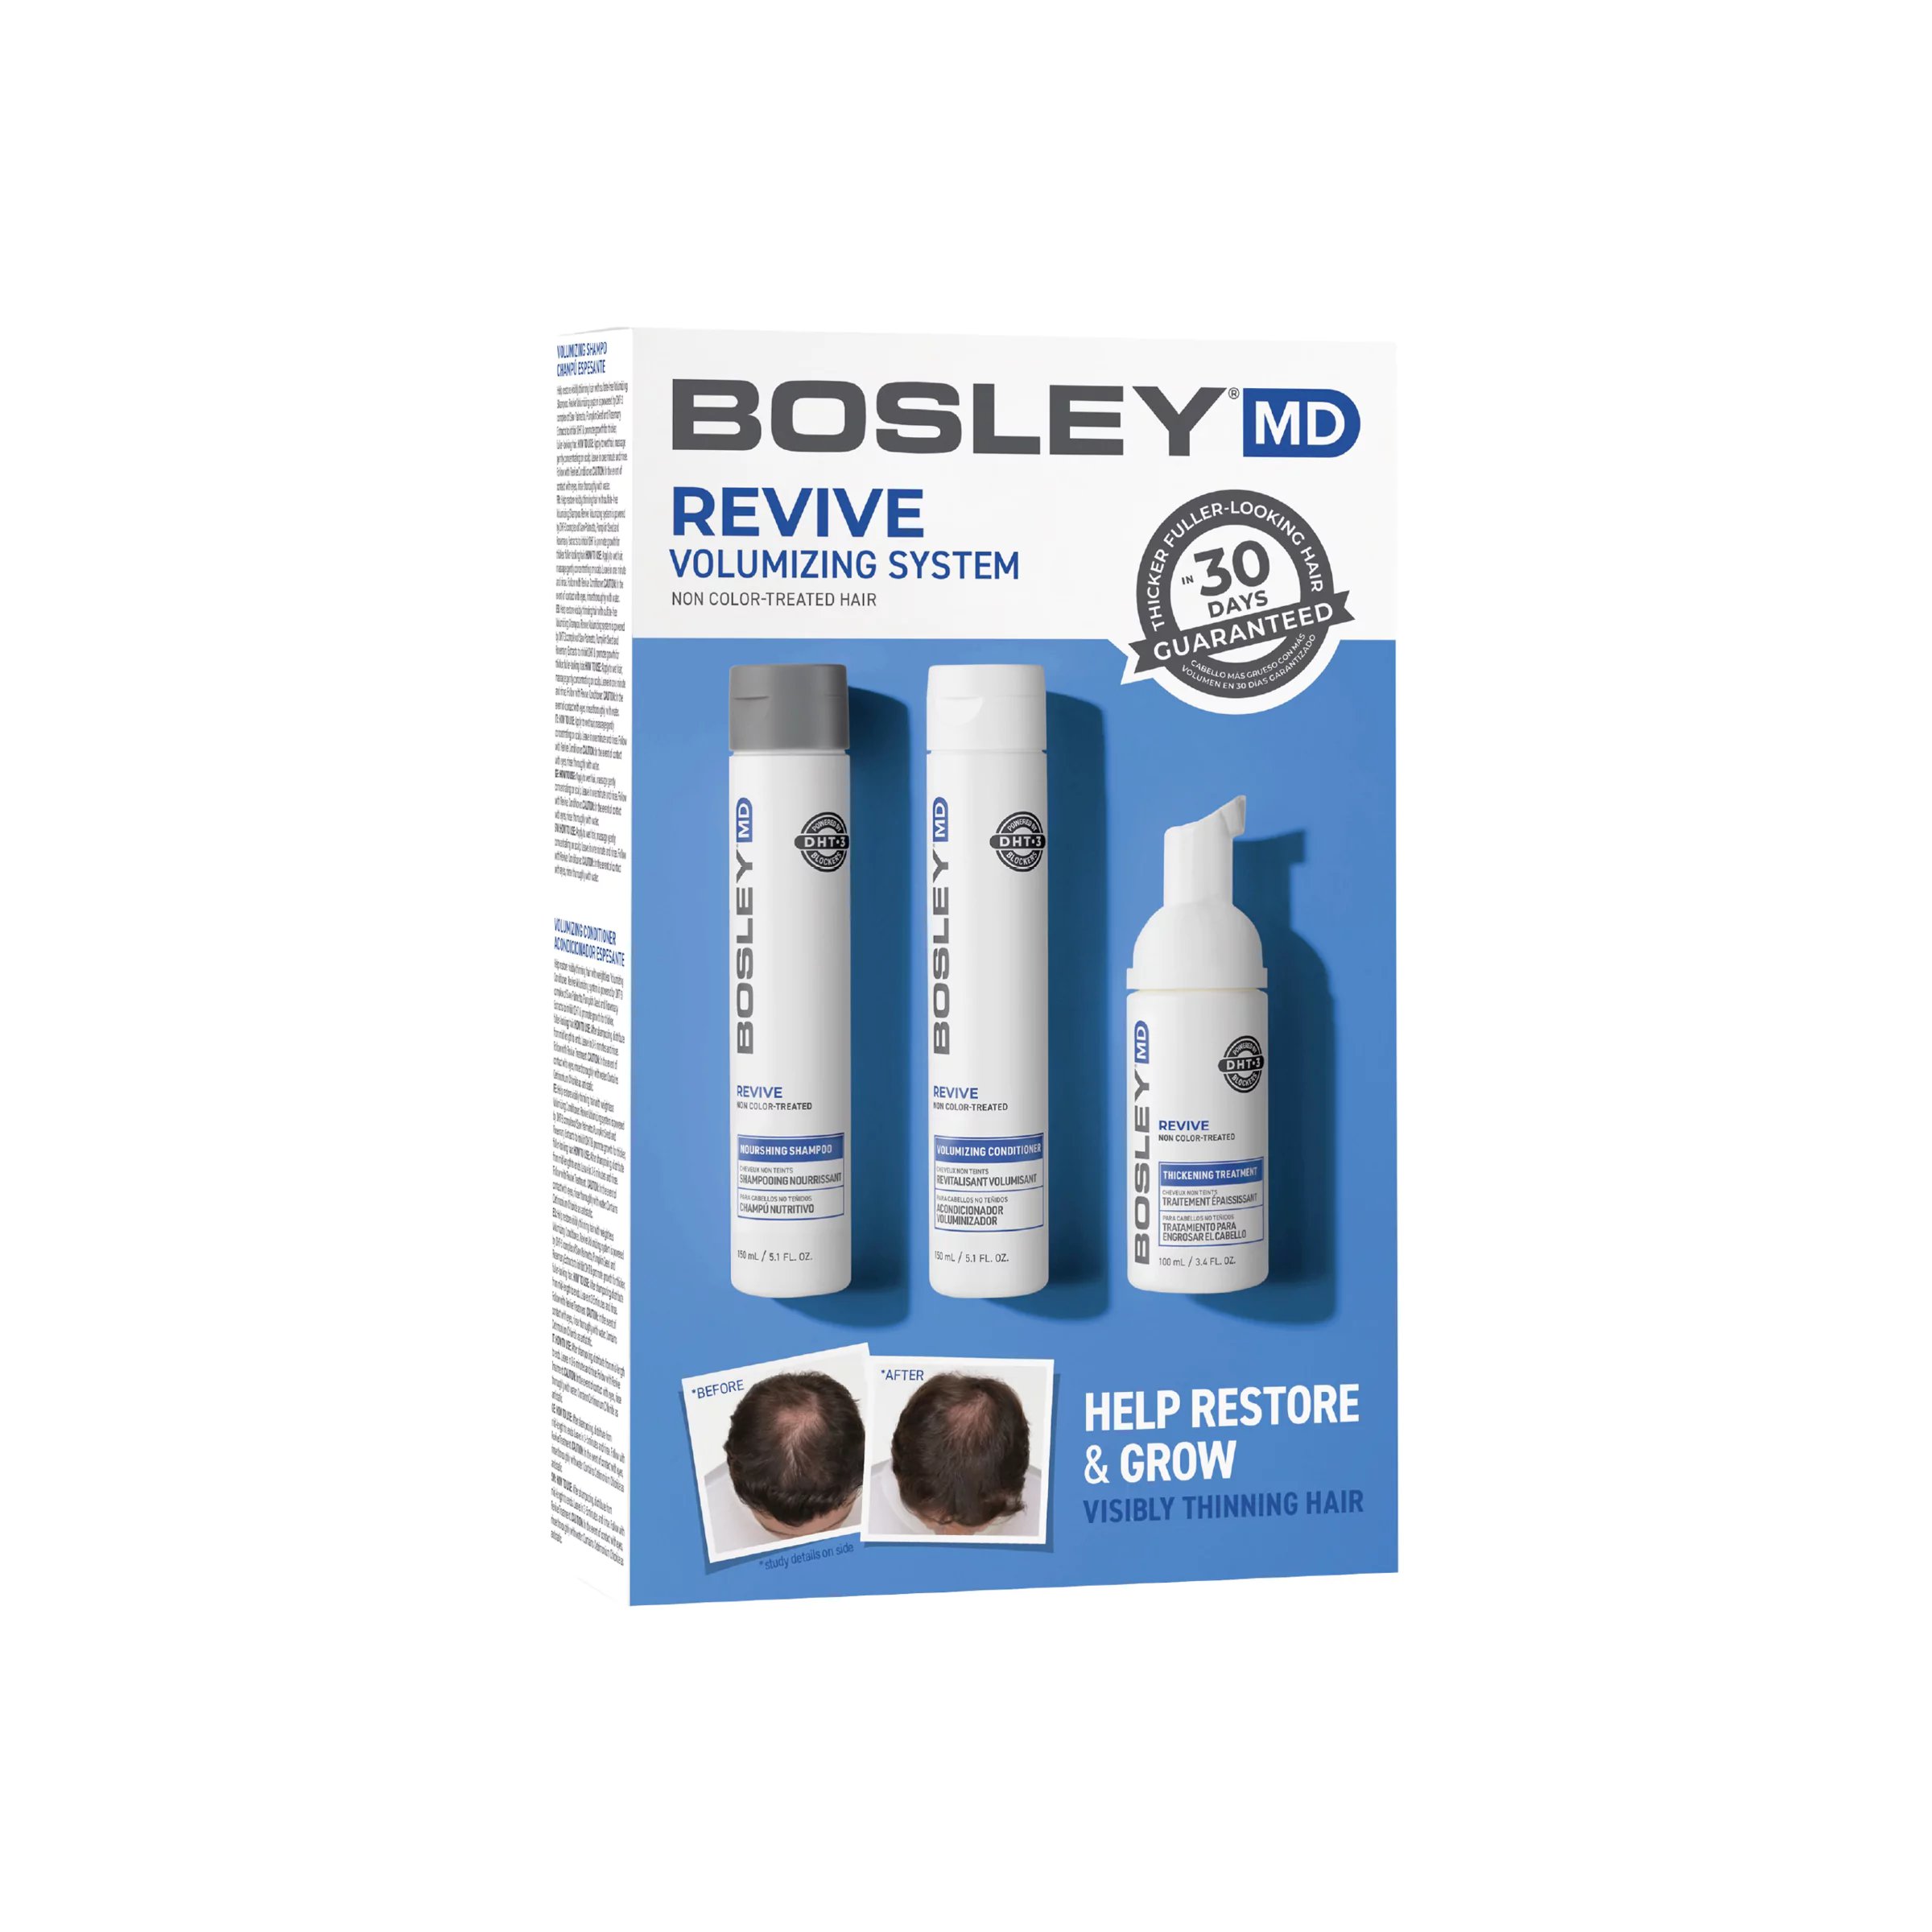 Bosley MD Revive Kit - Non Color Treated